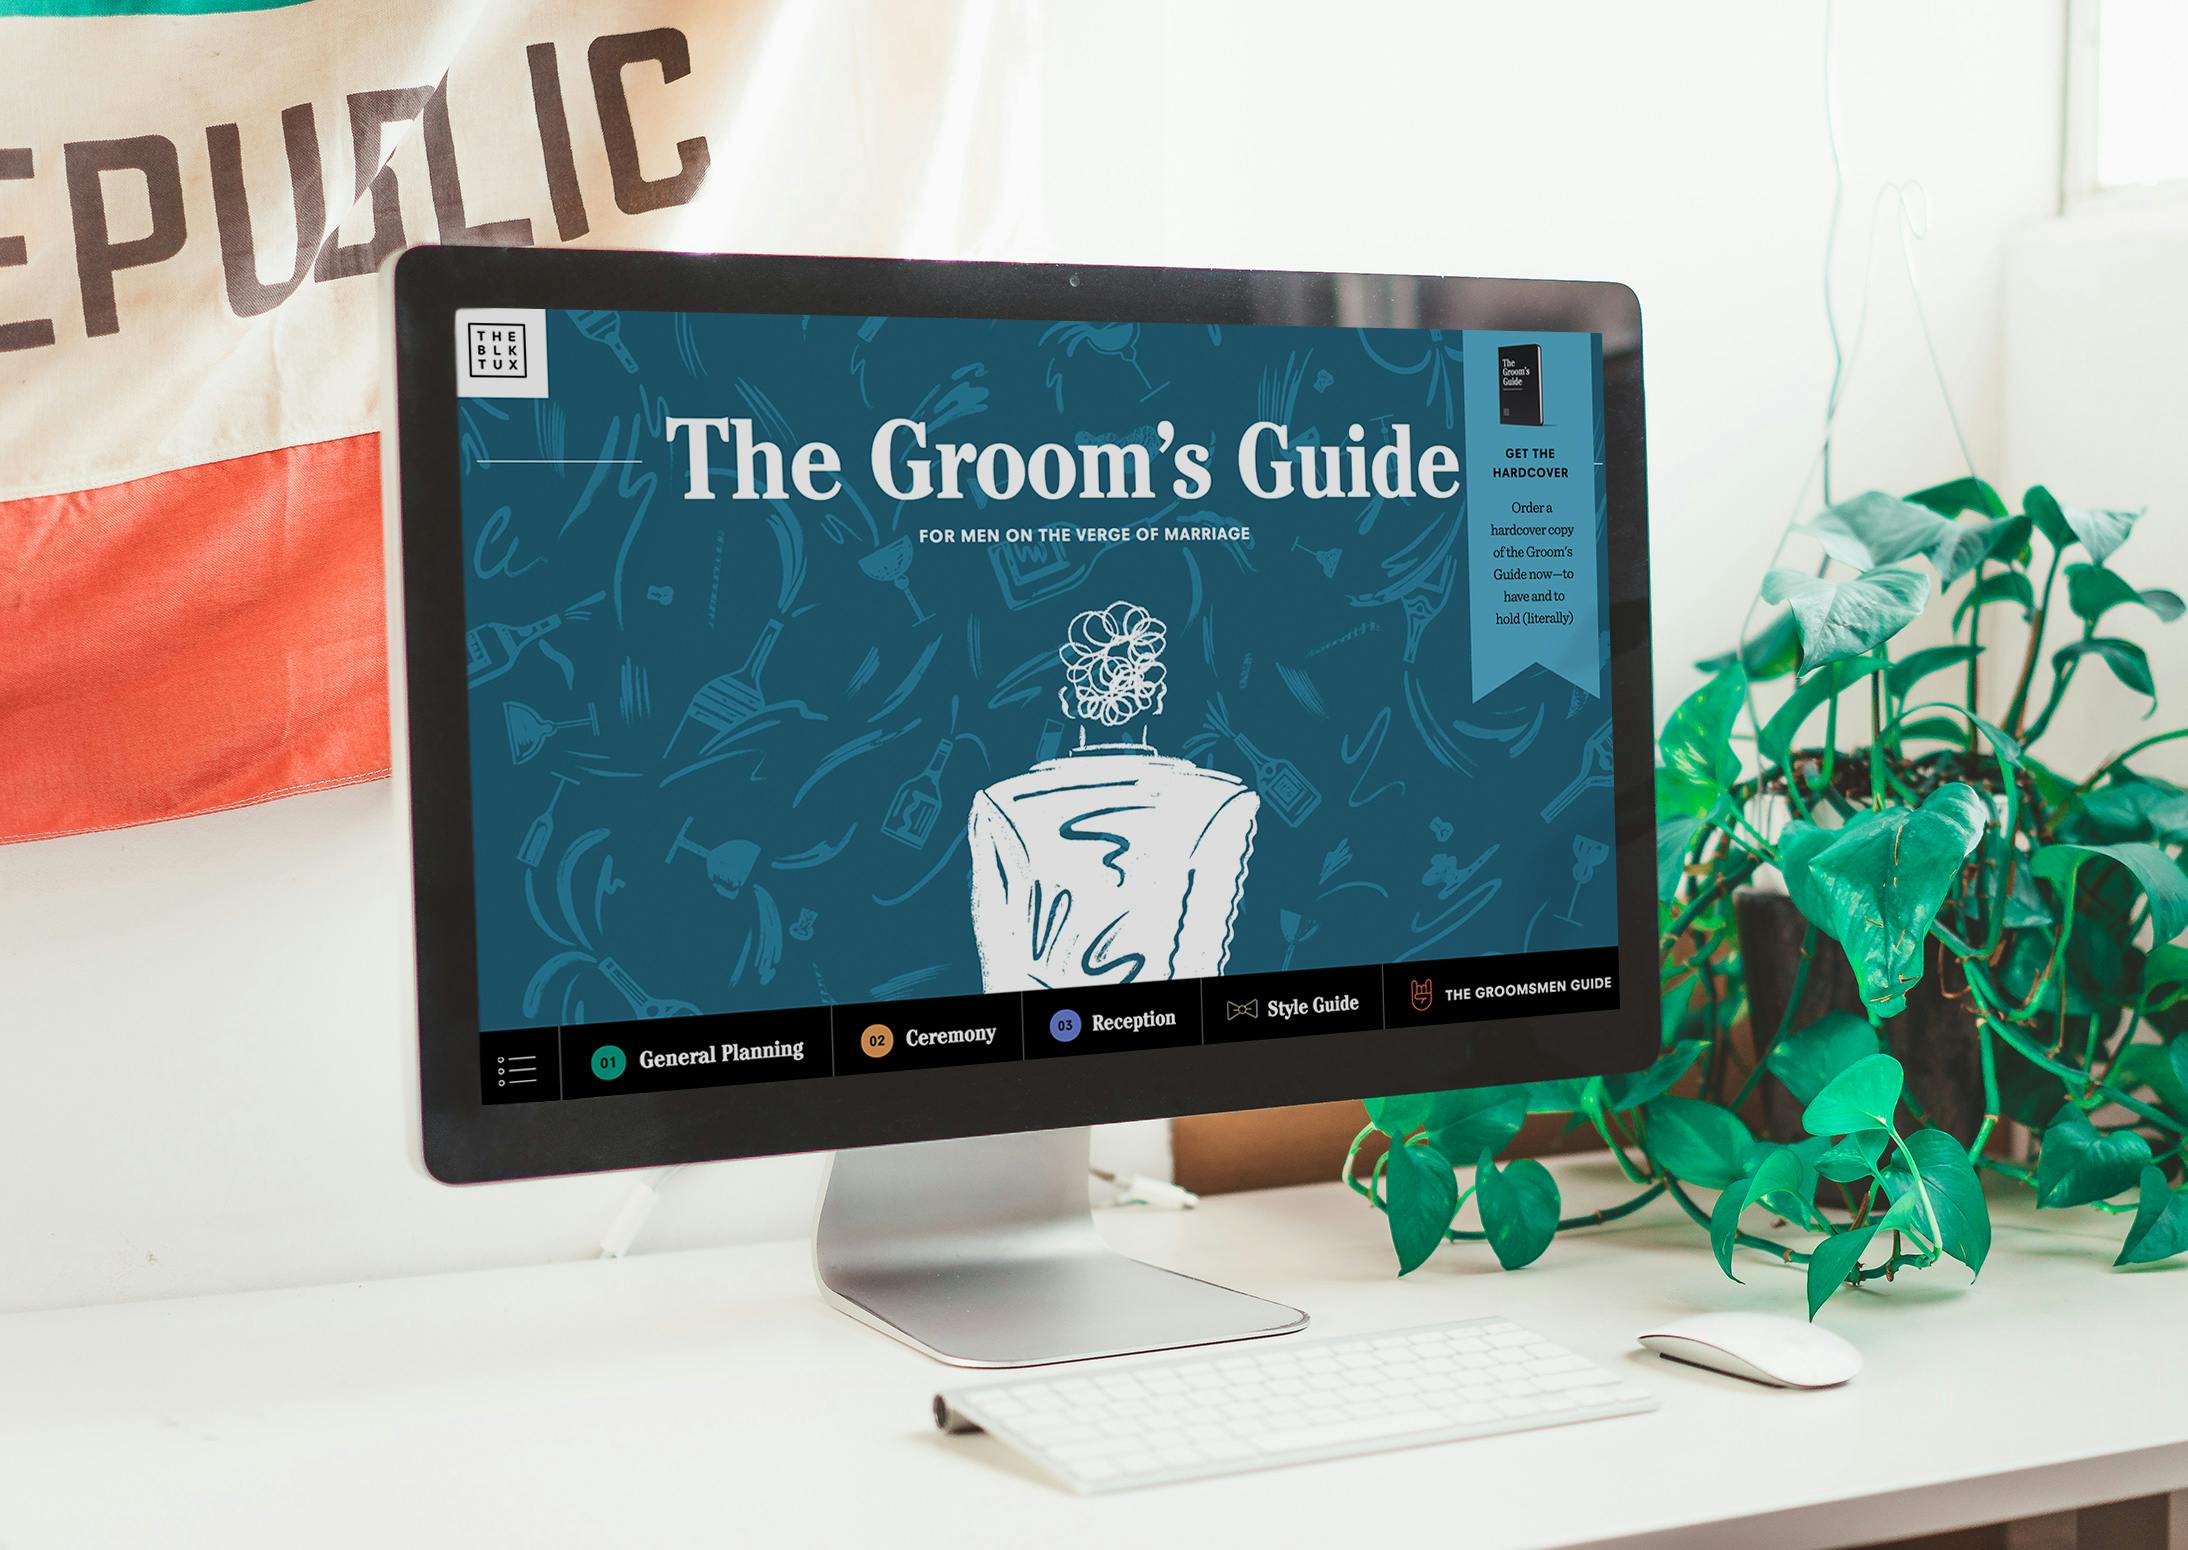 The Groom's Guide on a desktop